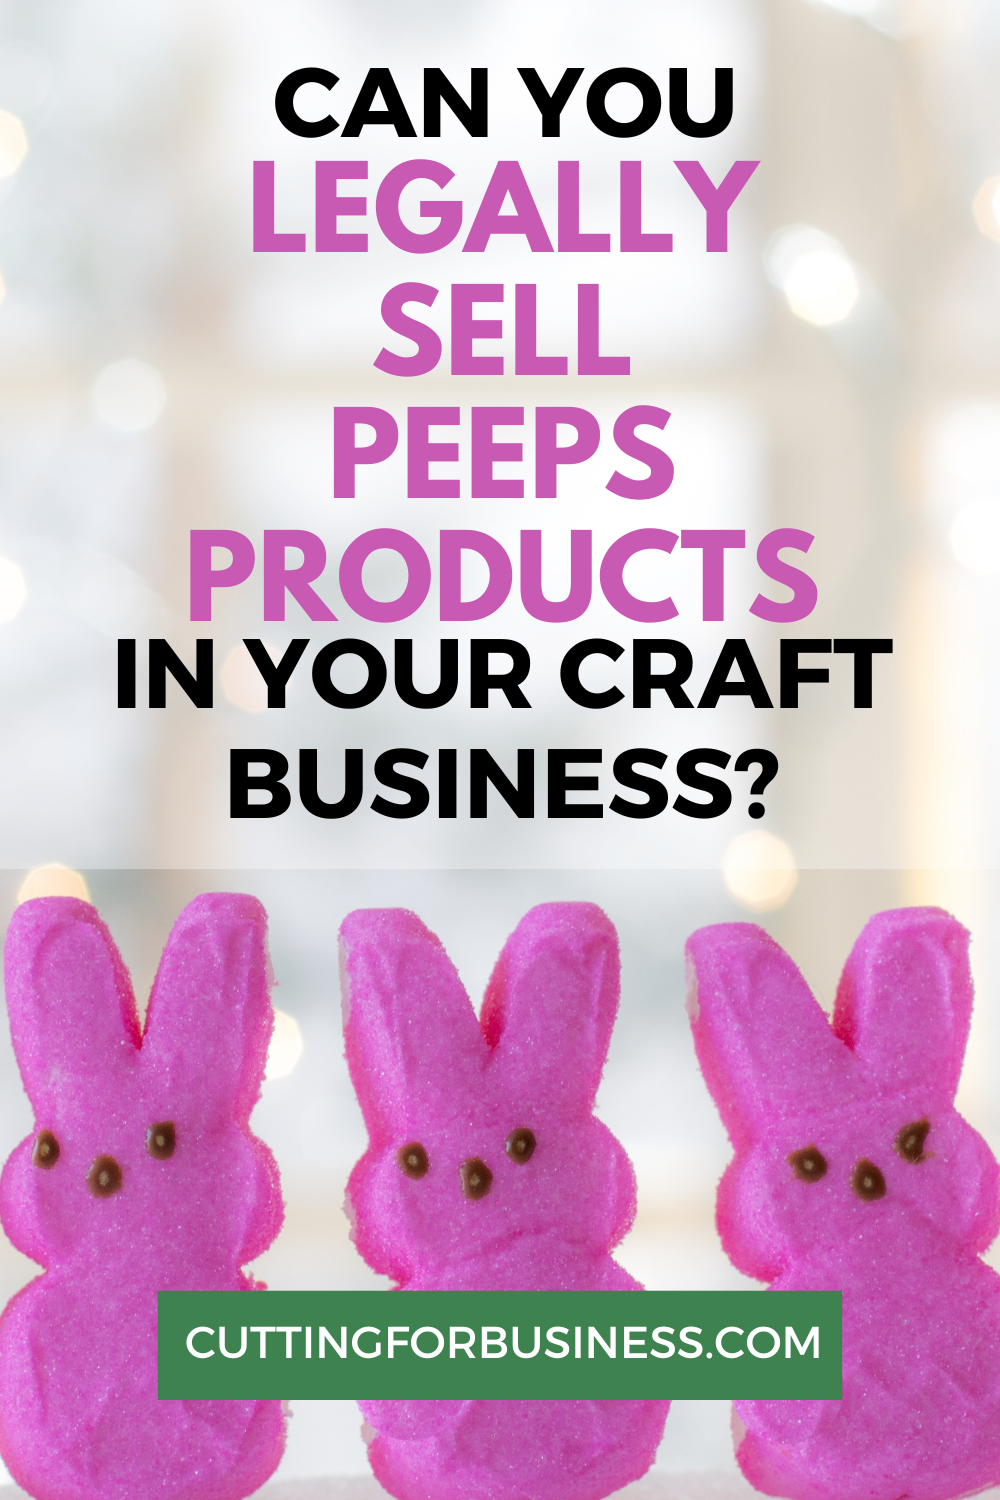 Can You Legally Sell Peeps Products in Your Craft Business - Trademarks - cuttingforbusiness.com.